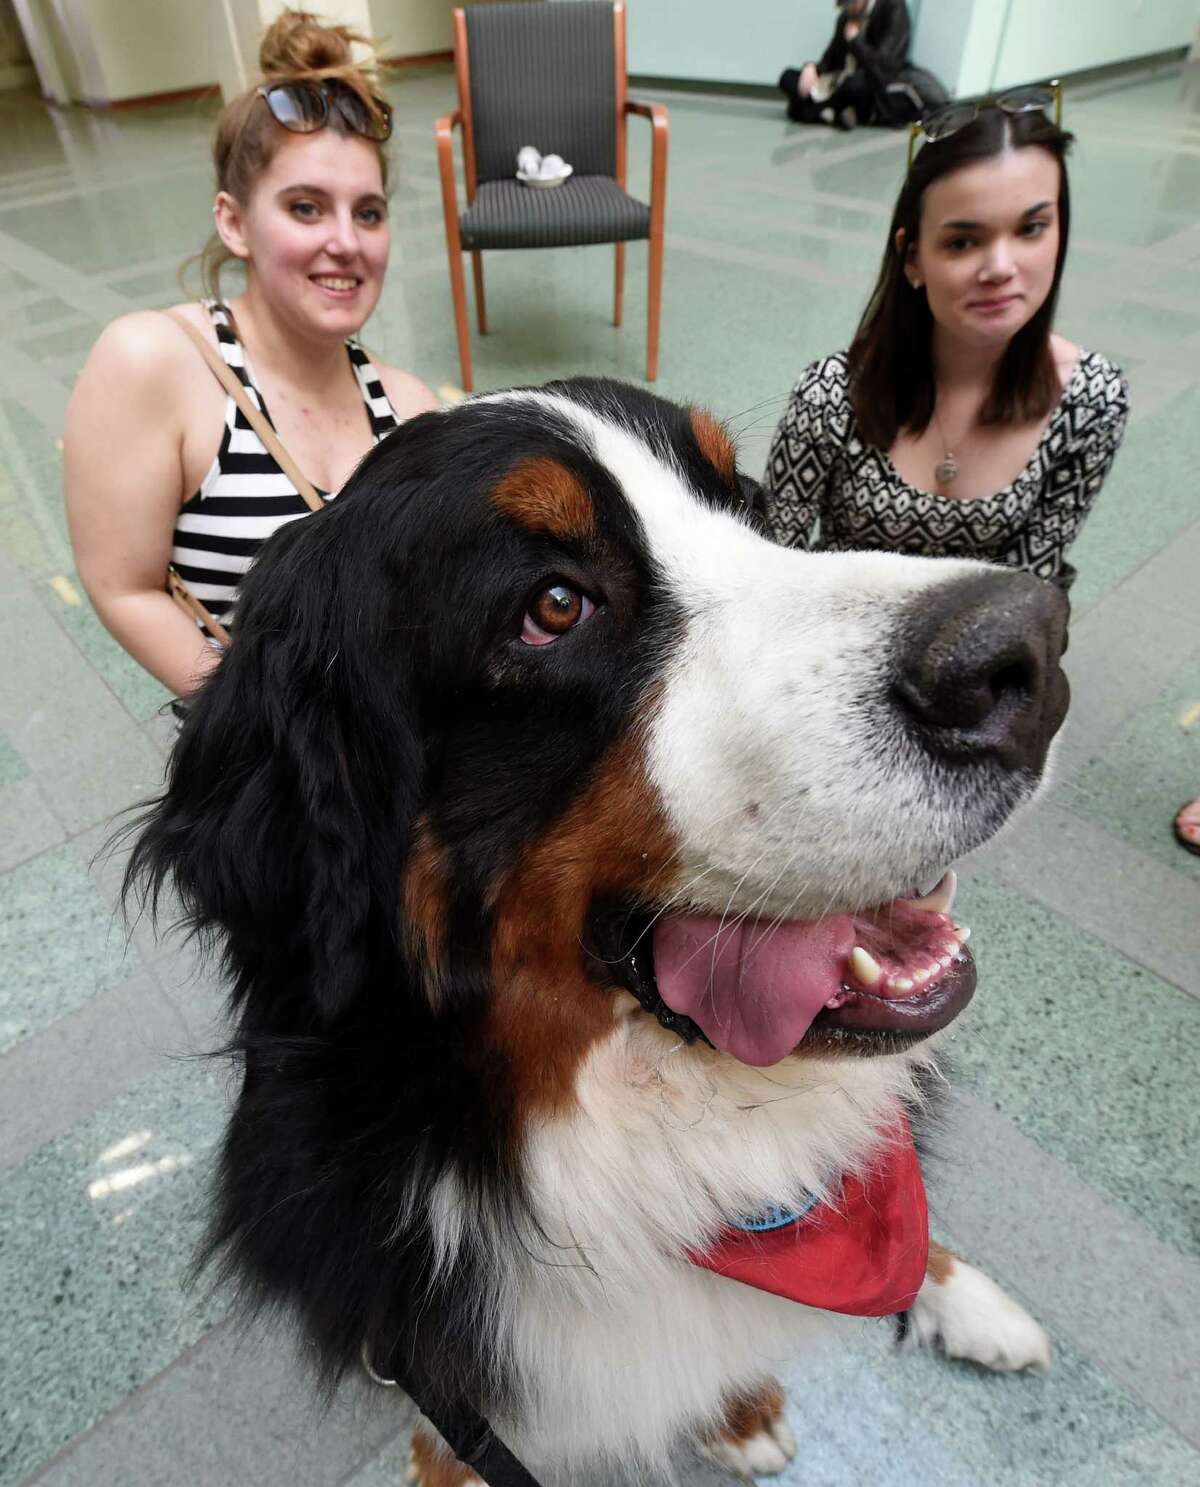 Photo: Therapy dog visits HVCC students during finals